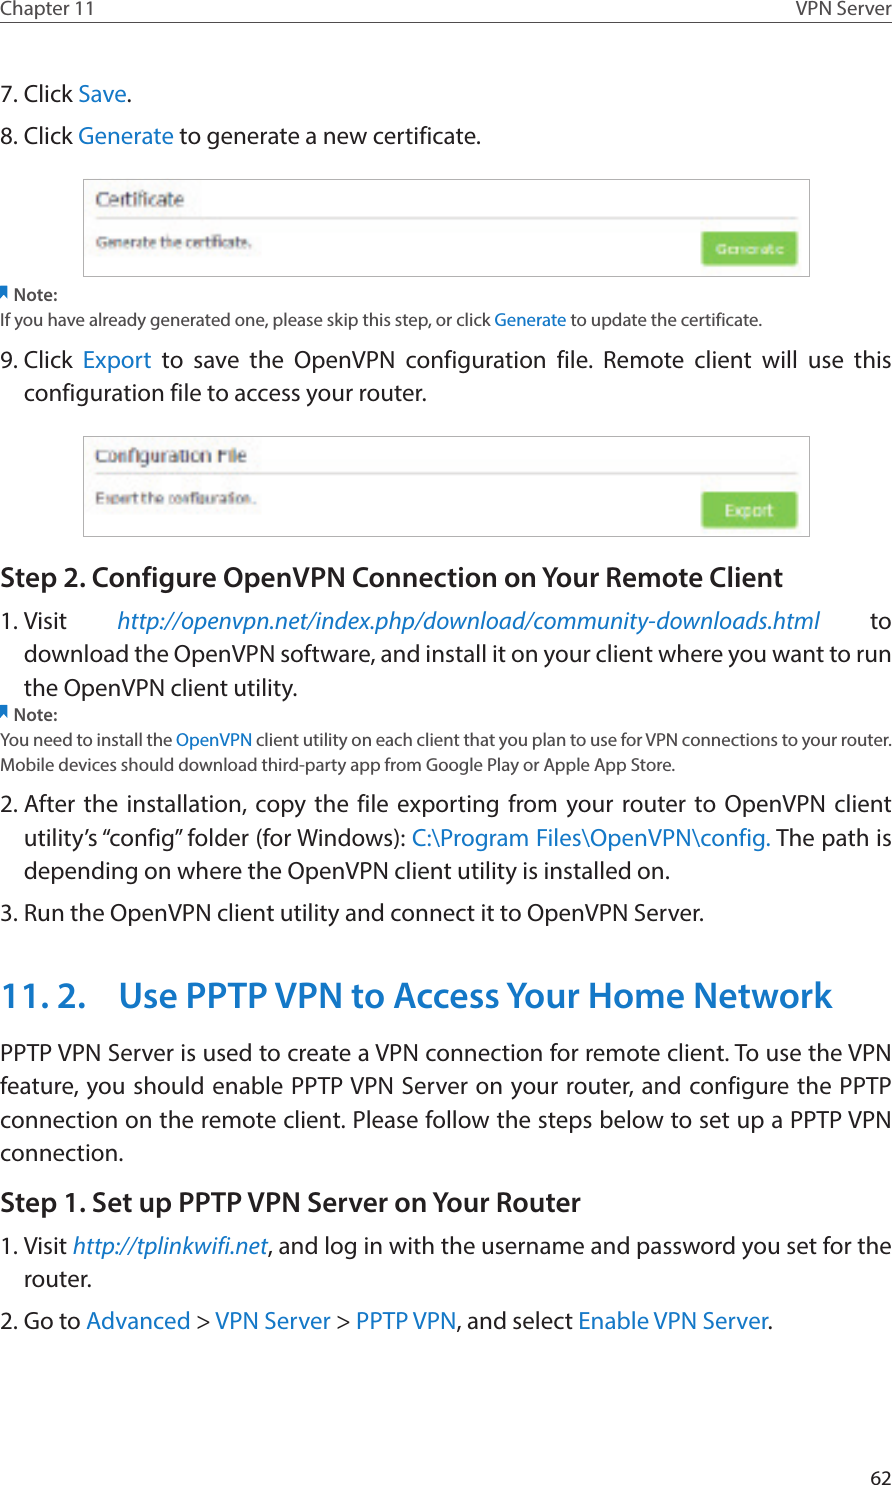 62Chapter 11 VPN Server7. Click Save.8. Click Generate to generate a new certificate. Note:If you have already generated one, please skip this step, or click Generate to update the certificate.9. Click  Export to save the OpenVPN configuration file. Remote client will use this configuration file to access your router.Step 2. Configure OpenVPN Connection on Your Remote Client1. Visit  http://openvpn.net/index.php/download/community-downloads.html to download the OpenVPN software, and install it on your client where you want to run the OpenVPN client utility.Note:You need to install the OpenVPN client utility on each client that you plan to use for VPN connections to your router. Mobile devices should download third-party app from Google Play or Apple App Store.2. After the installation, copy the file exporting from your router to OpenVPN client utility’s “config” folder (for Windows): C:\Program Files\OpenVPN\config. The path is depending on where the OpenVPN client utility is installed on.3. Run the OpenVPN client utility and connect it to OpenVPN Server.11. 2.  Use PPTP VPN to Access Your Home NetworkPPTP VPN Server is used to create a VPN connection for remote client. To use the VPN feature, you should enable PPTP VPN Server on your router, and configure the PPTP connection on the remote client. Please follow the steps below to set up a PPTP VPN connection.Step 1. Set up PPTP VPN Server on Your Router1. Visit http://tplinkwifi.net, and log in with the username and password you set for the router.2. Go to Advanced &gt; VPN Server &gt; PPTP VPN, and select Enable VPN Server.